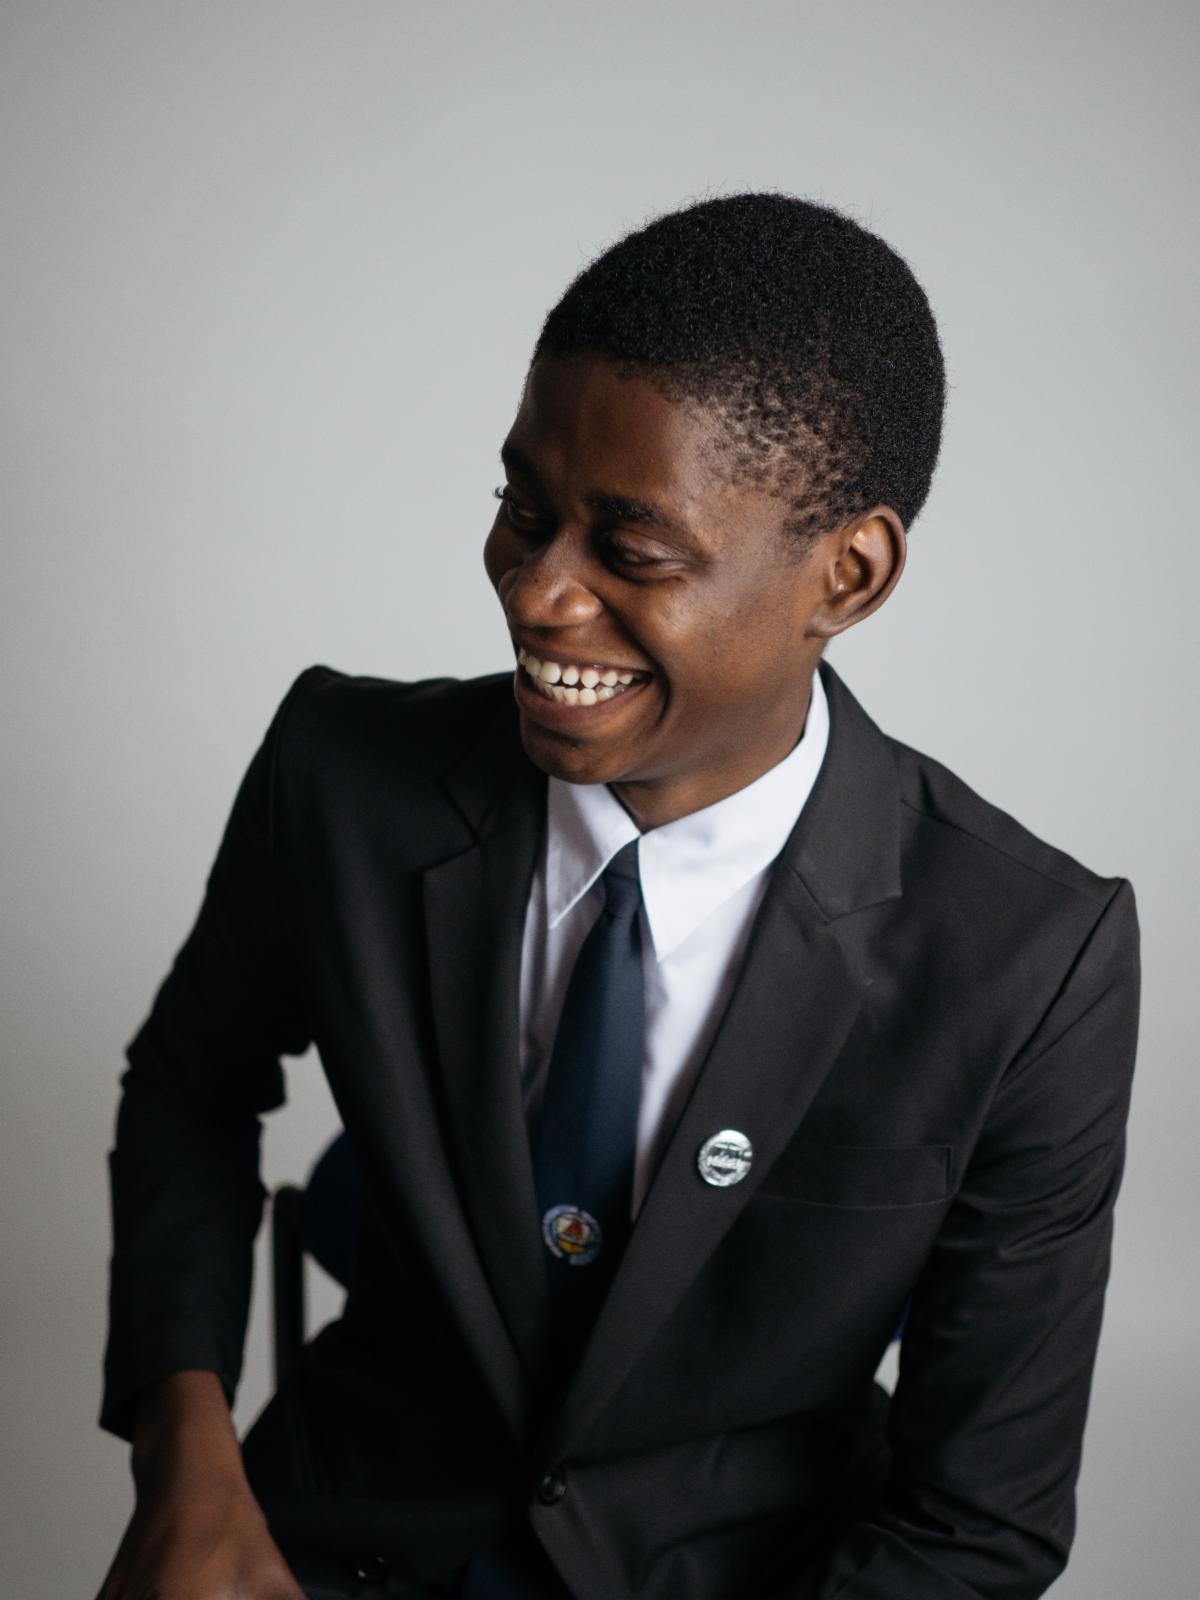 Photo of young black man in a business suit